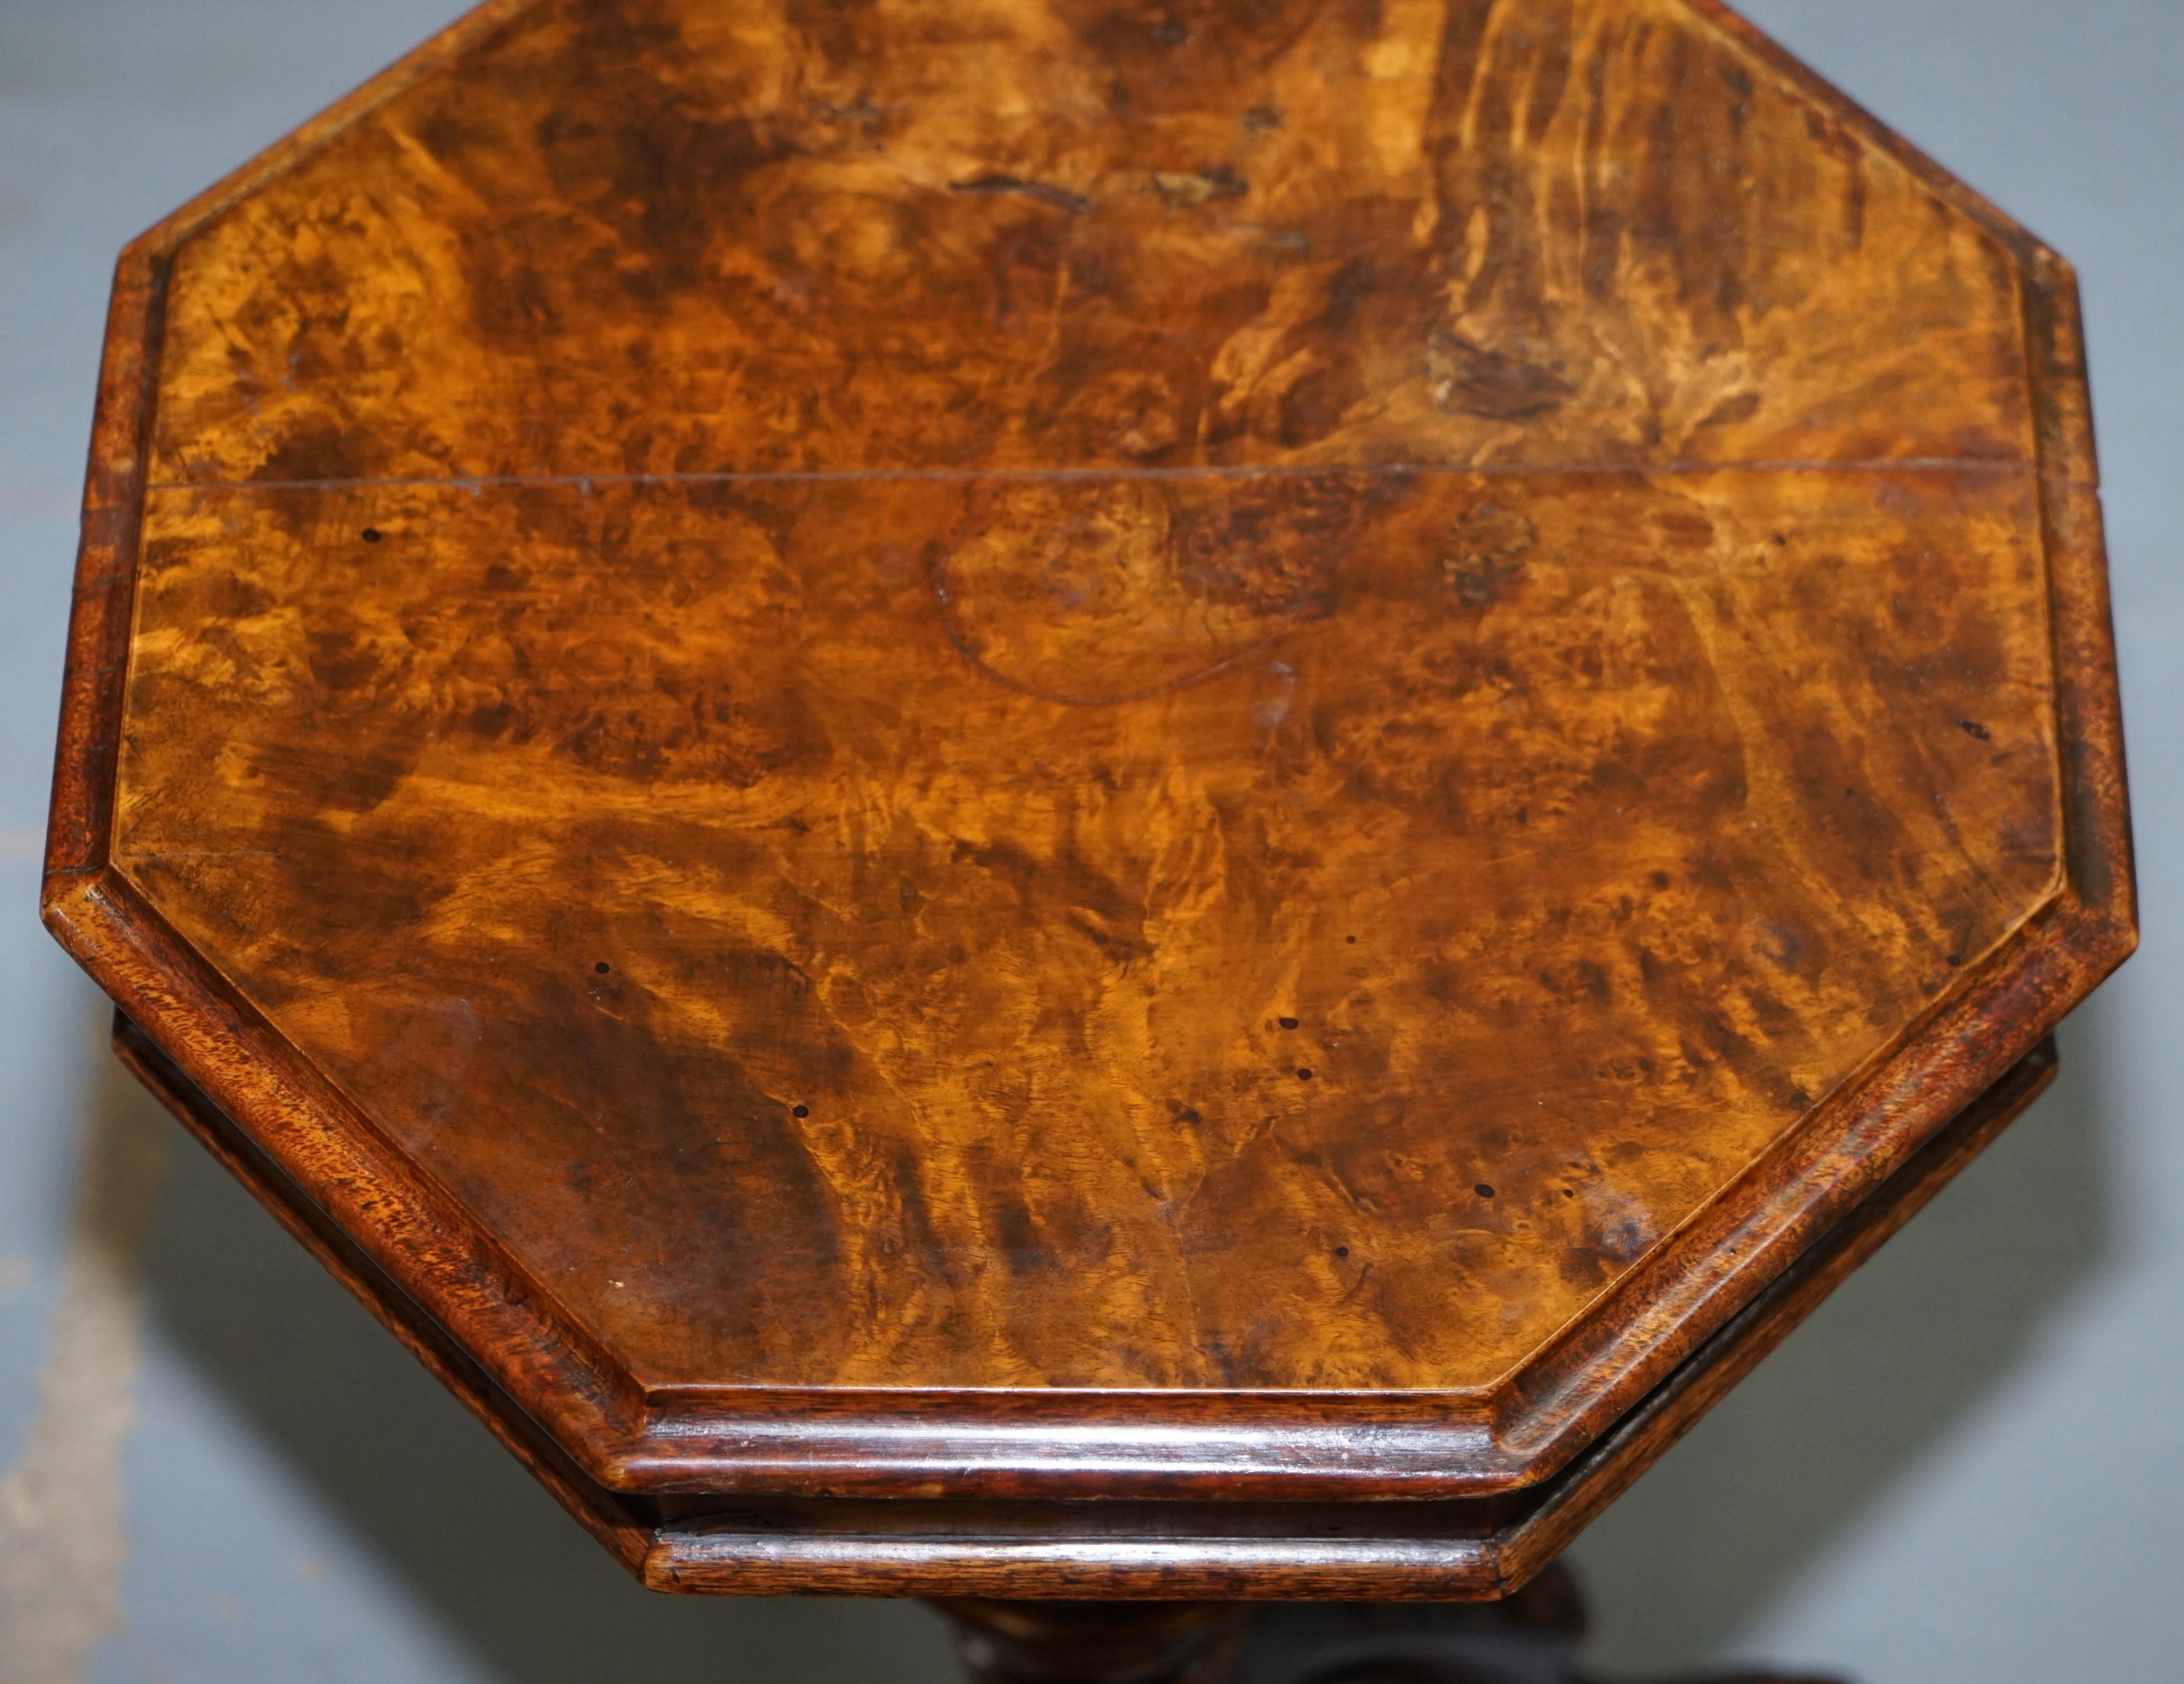 Hand-Crafted Stunning Burr Walnut Victorian Sewing or Work Box Great as Side Lamp End Table